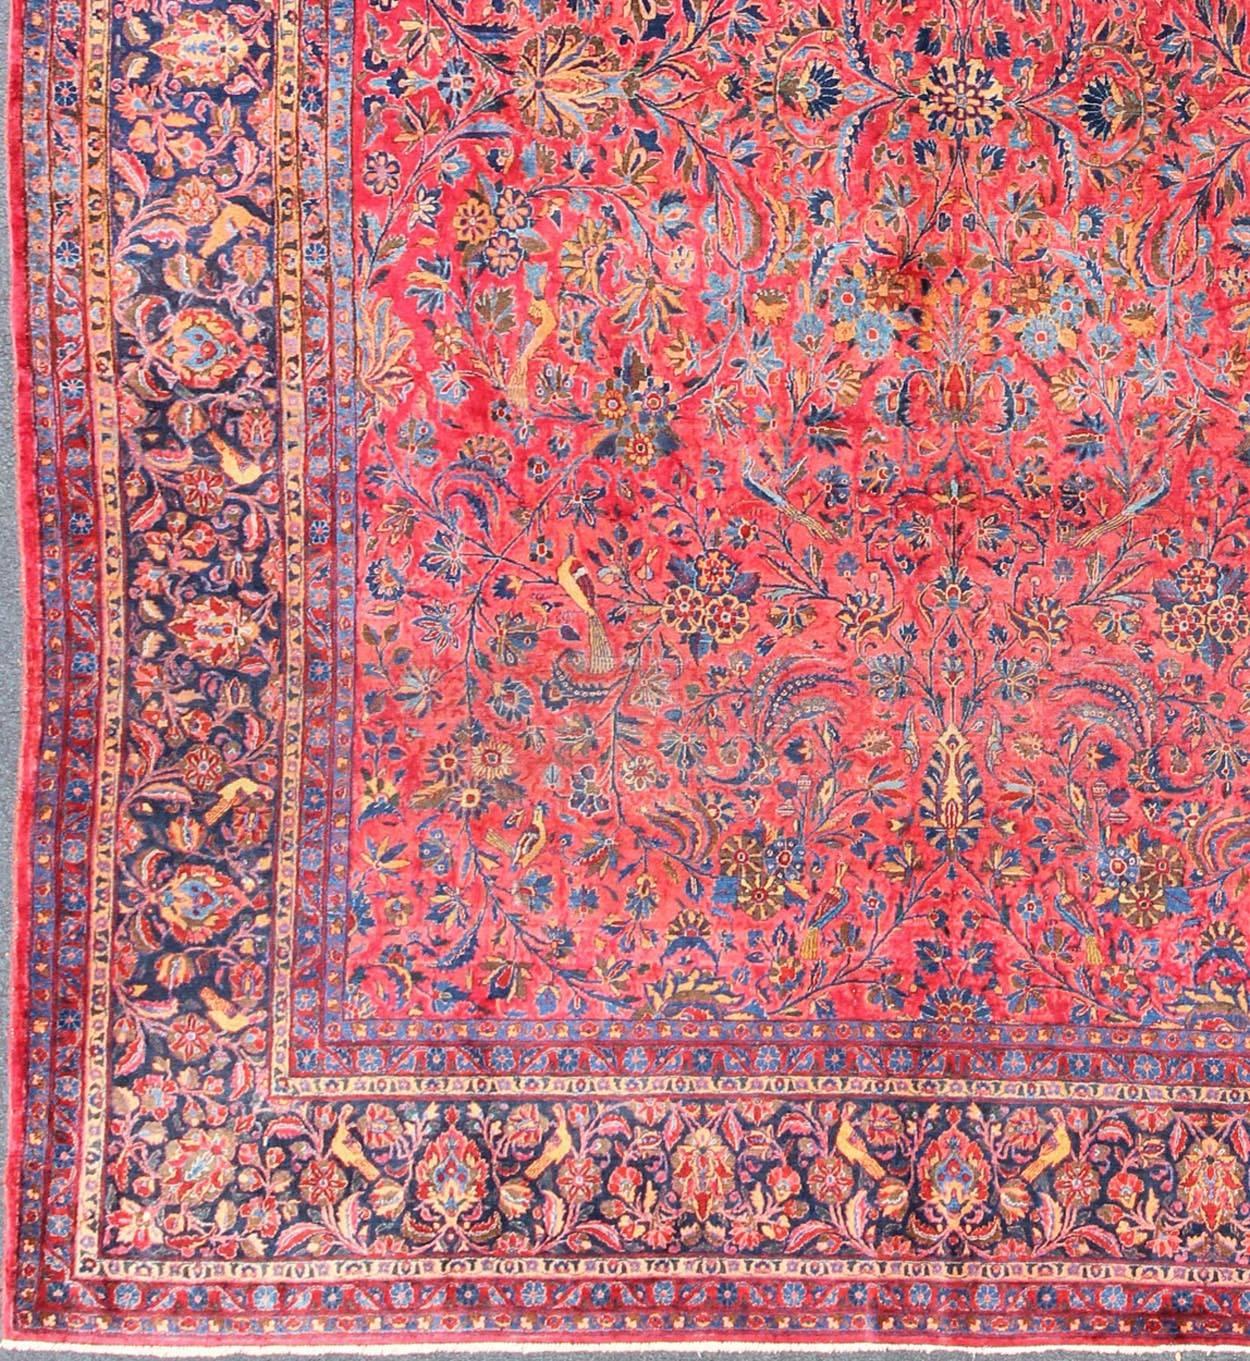 Antique Persian Kashan Rug With a All-Over Design On A Red Field and Blue Border.  Keivan Woven Arts / Rug H8-0102, country of origin / type: Persian / Kashan, circa early-20th century. 
Measures: 10'6'' x 13'10''.
This Antique Kashan carpet,